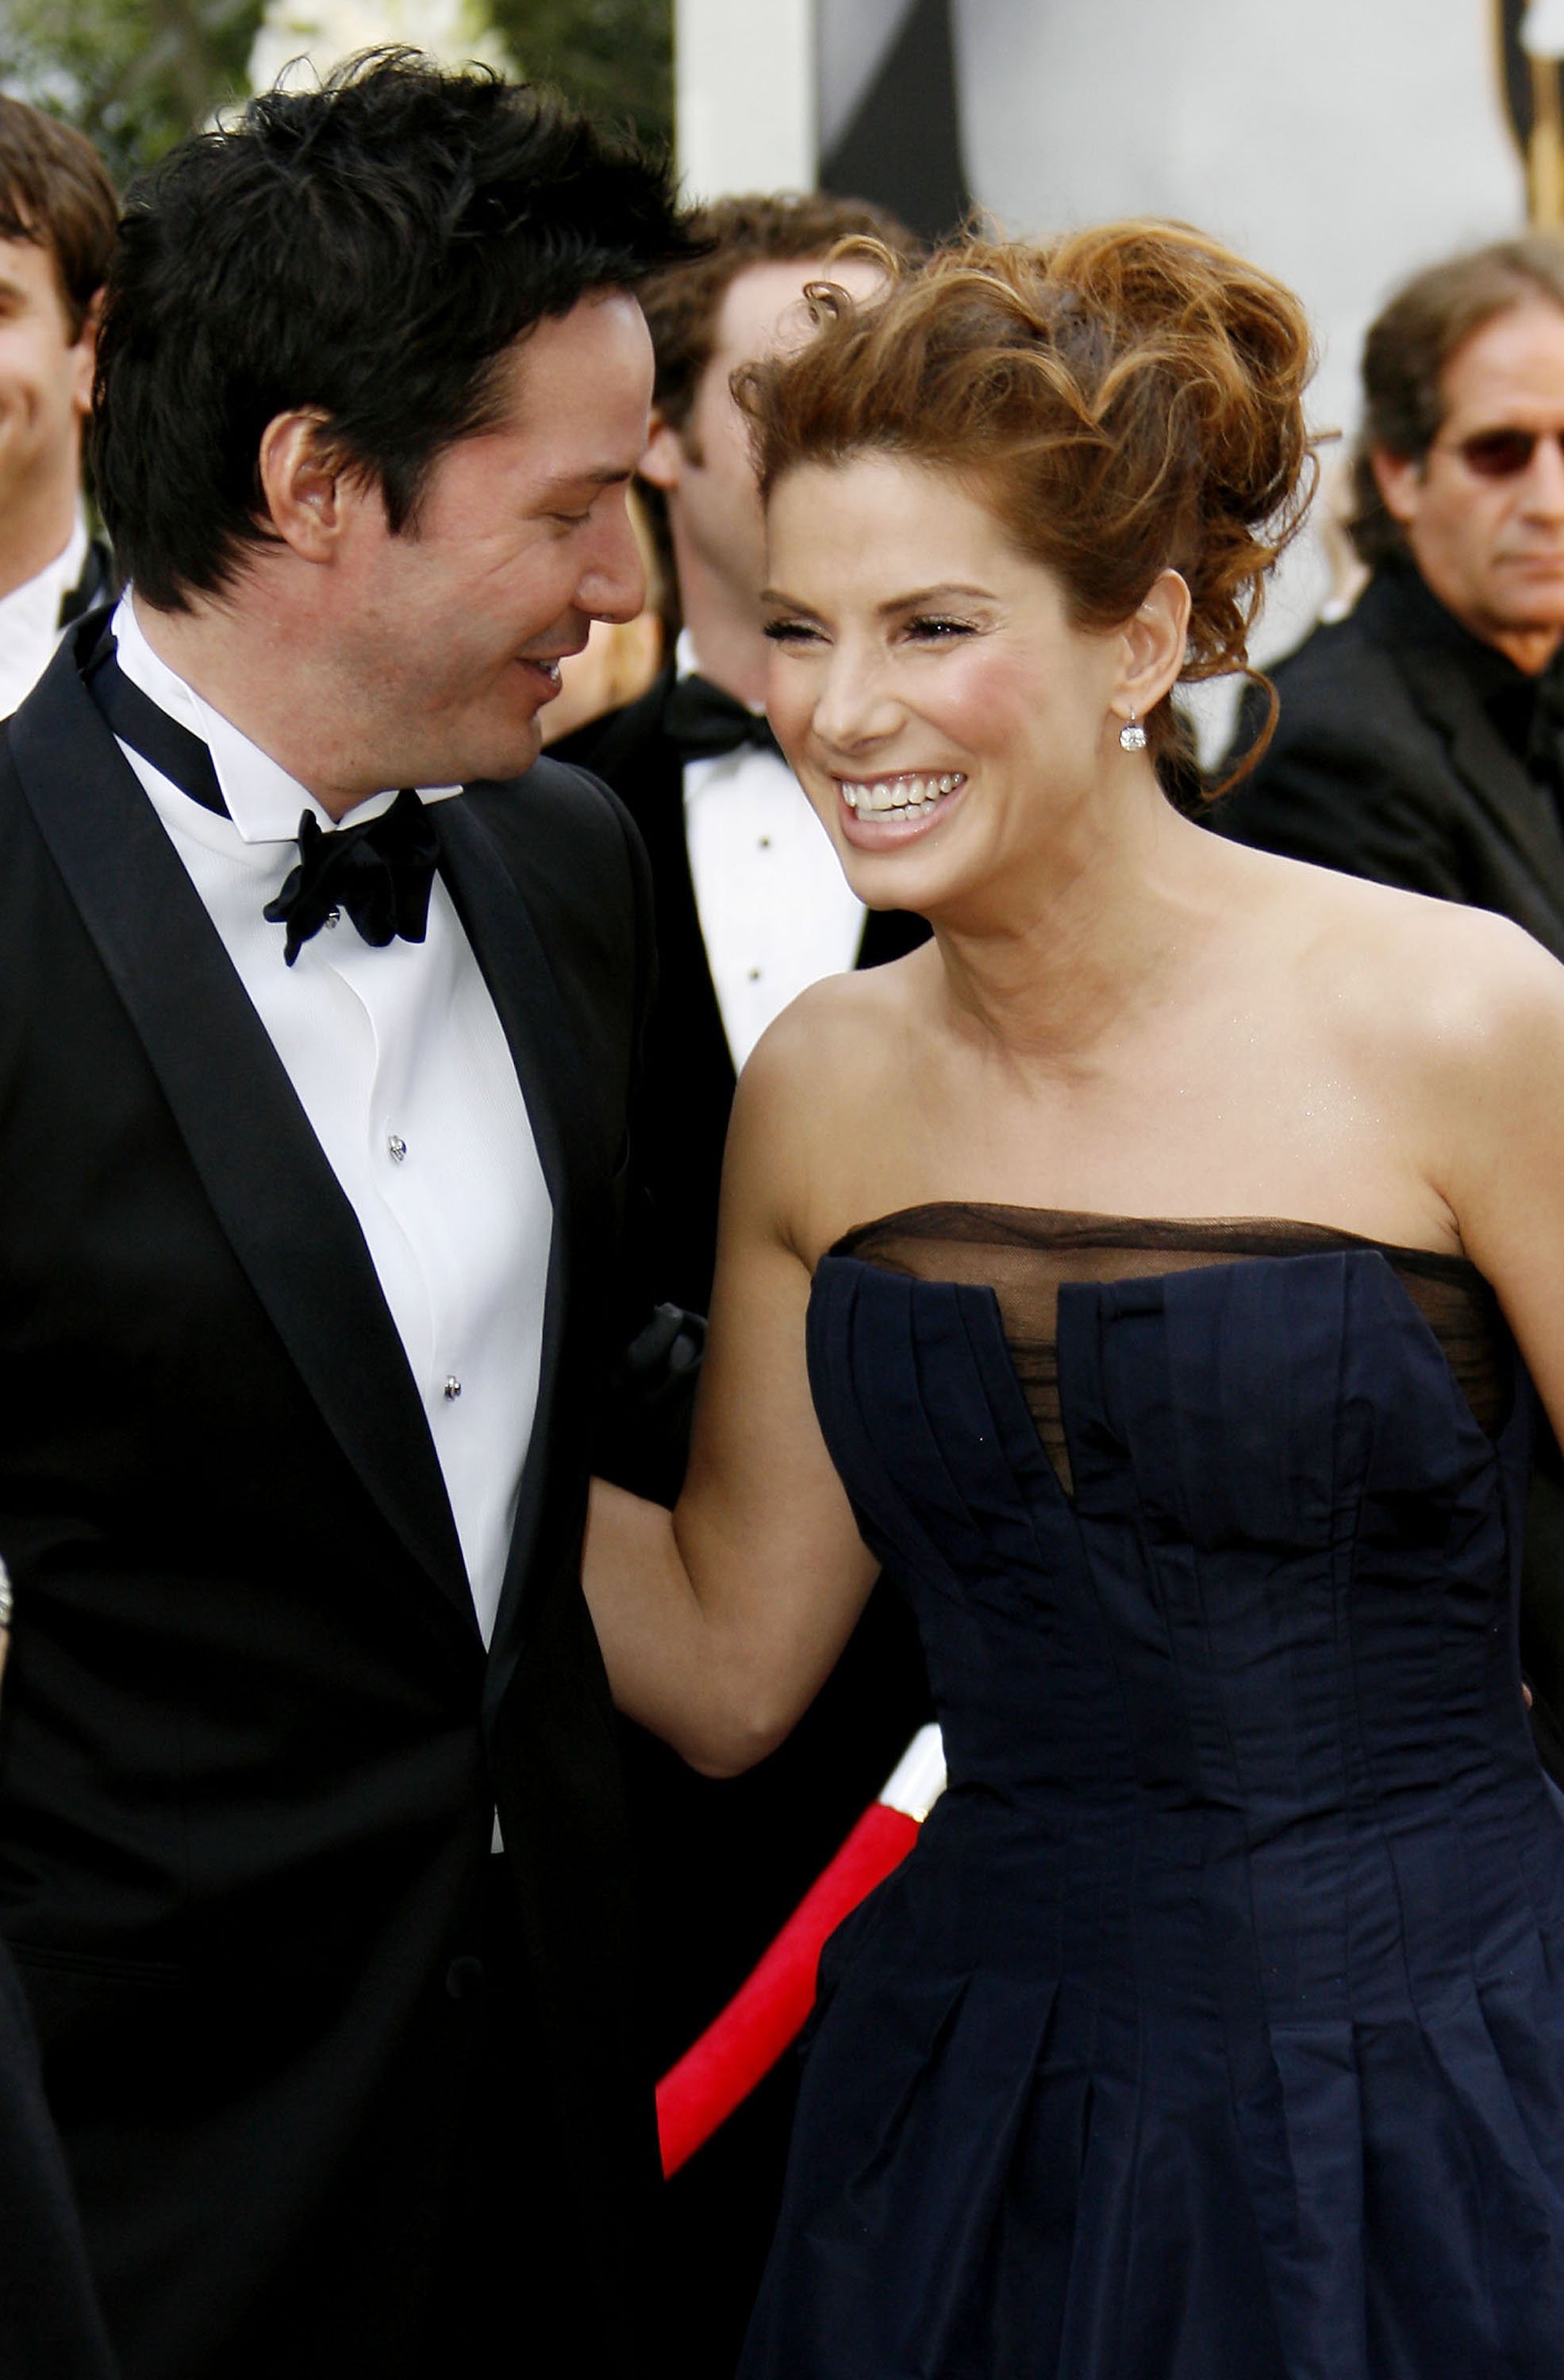 Sandra Bullock and Keanu Reeves during The 78th Annual Academy Awards - Red Carpet at Kodak Theatre in Hollywood, California | Source: Getty Images